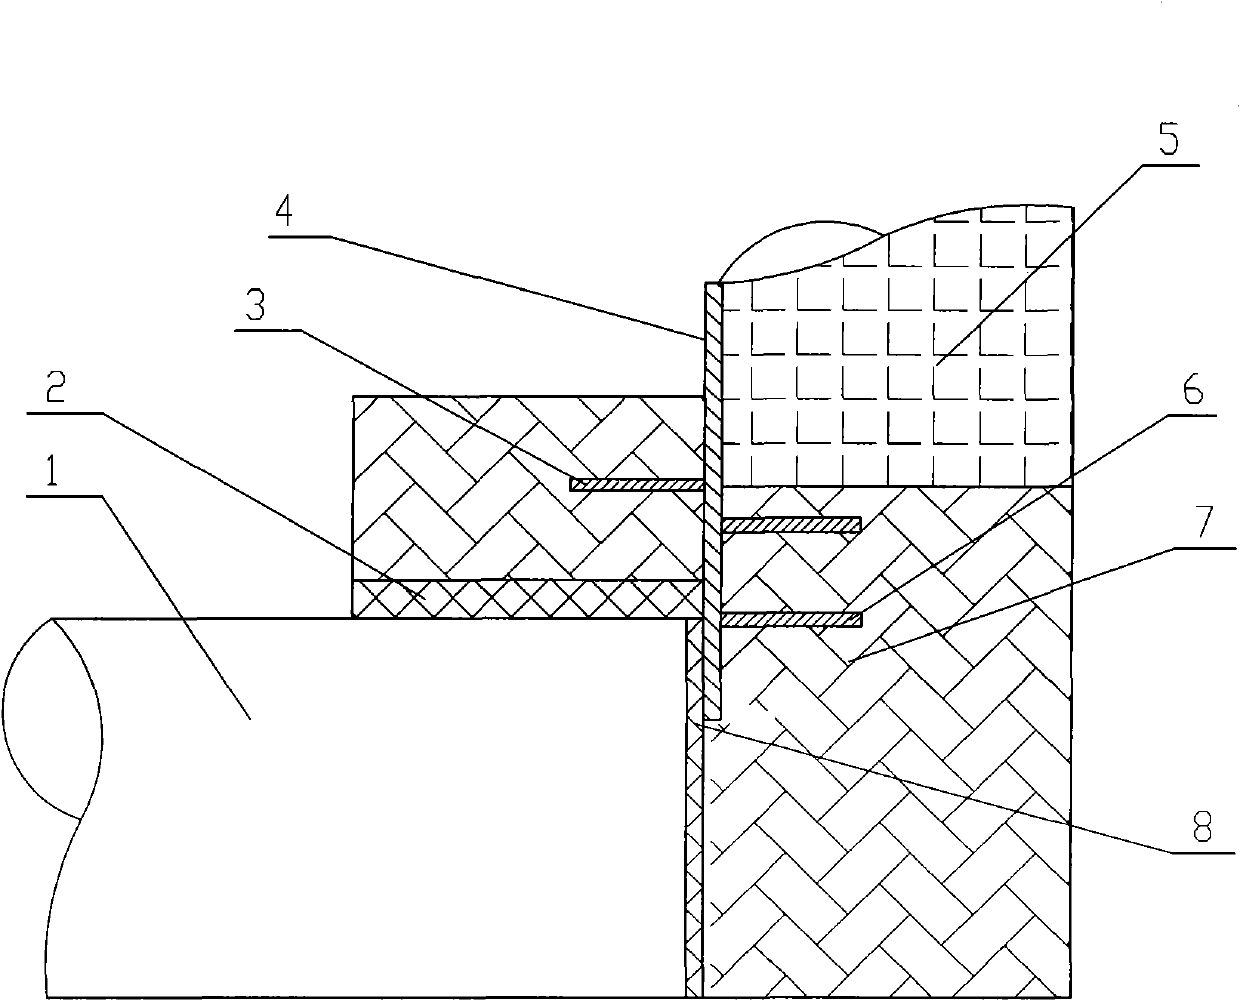 Method for constructing refractory materials at pellet rotary kiln bellow port